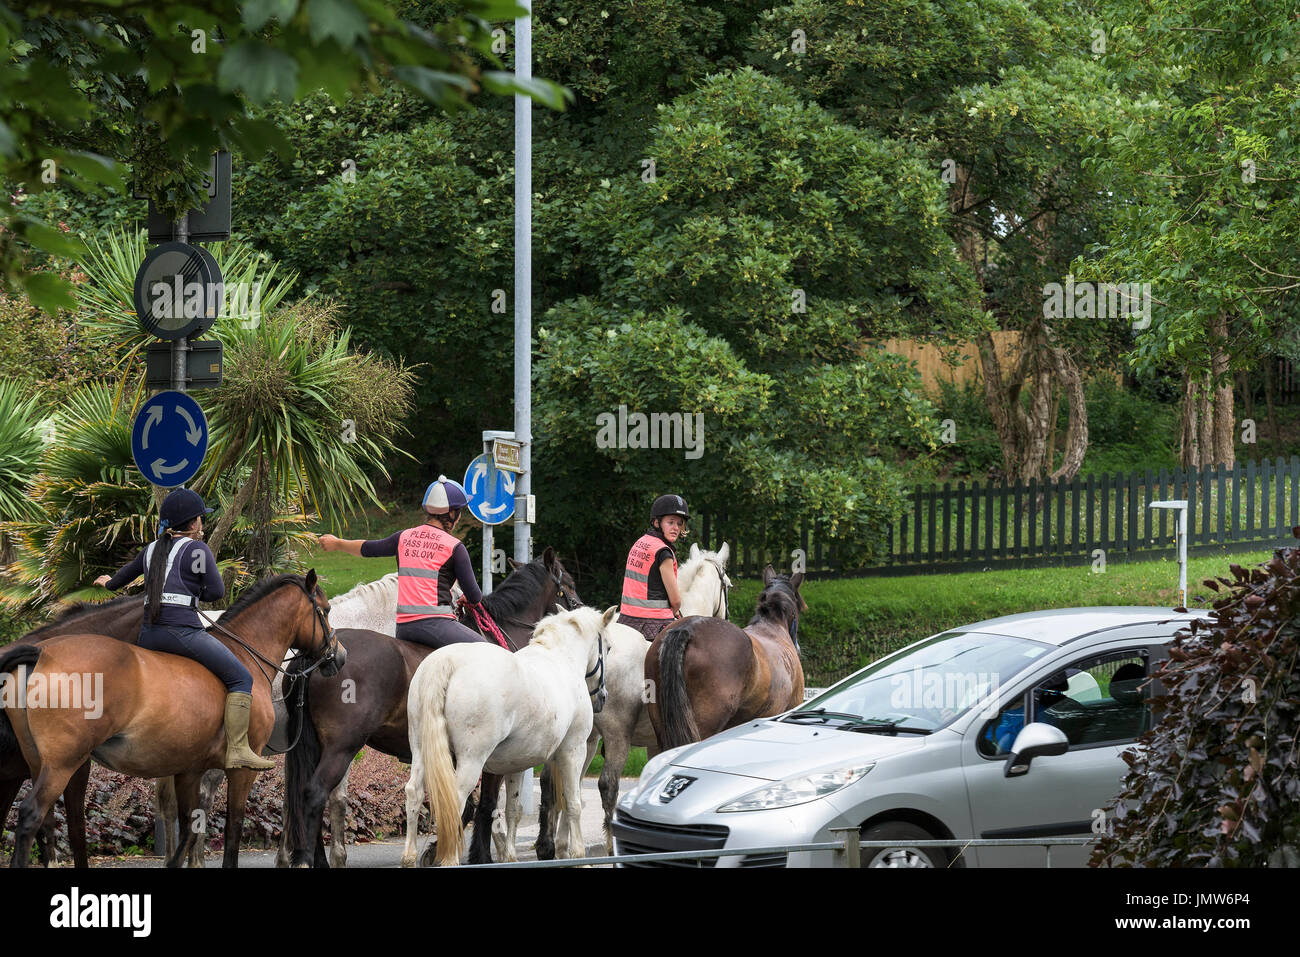 Horse riders riding on public roads. Stock Photo